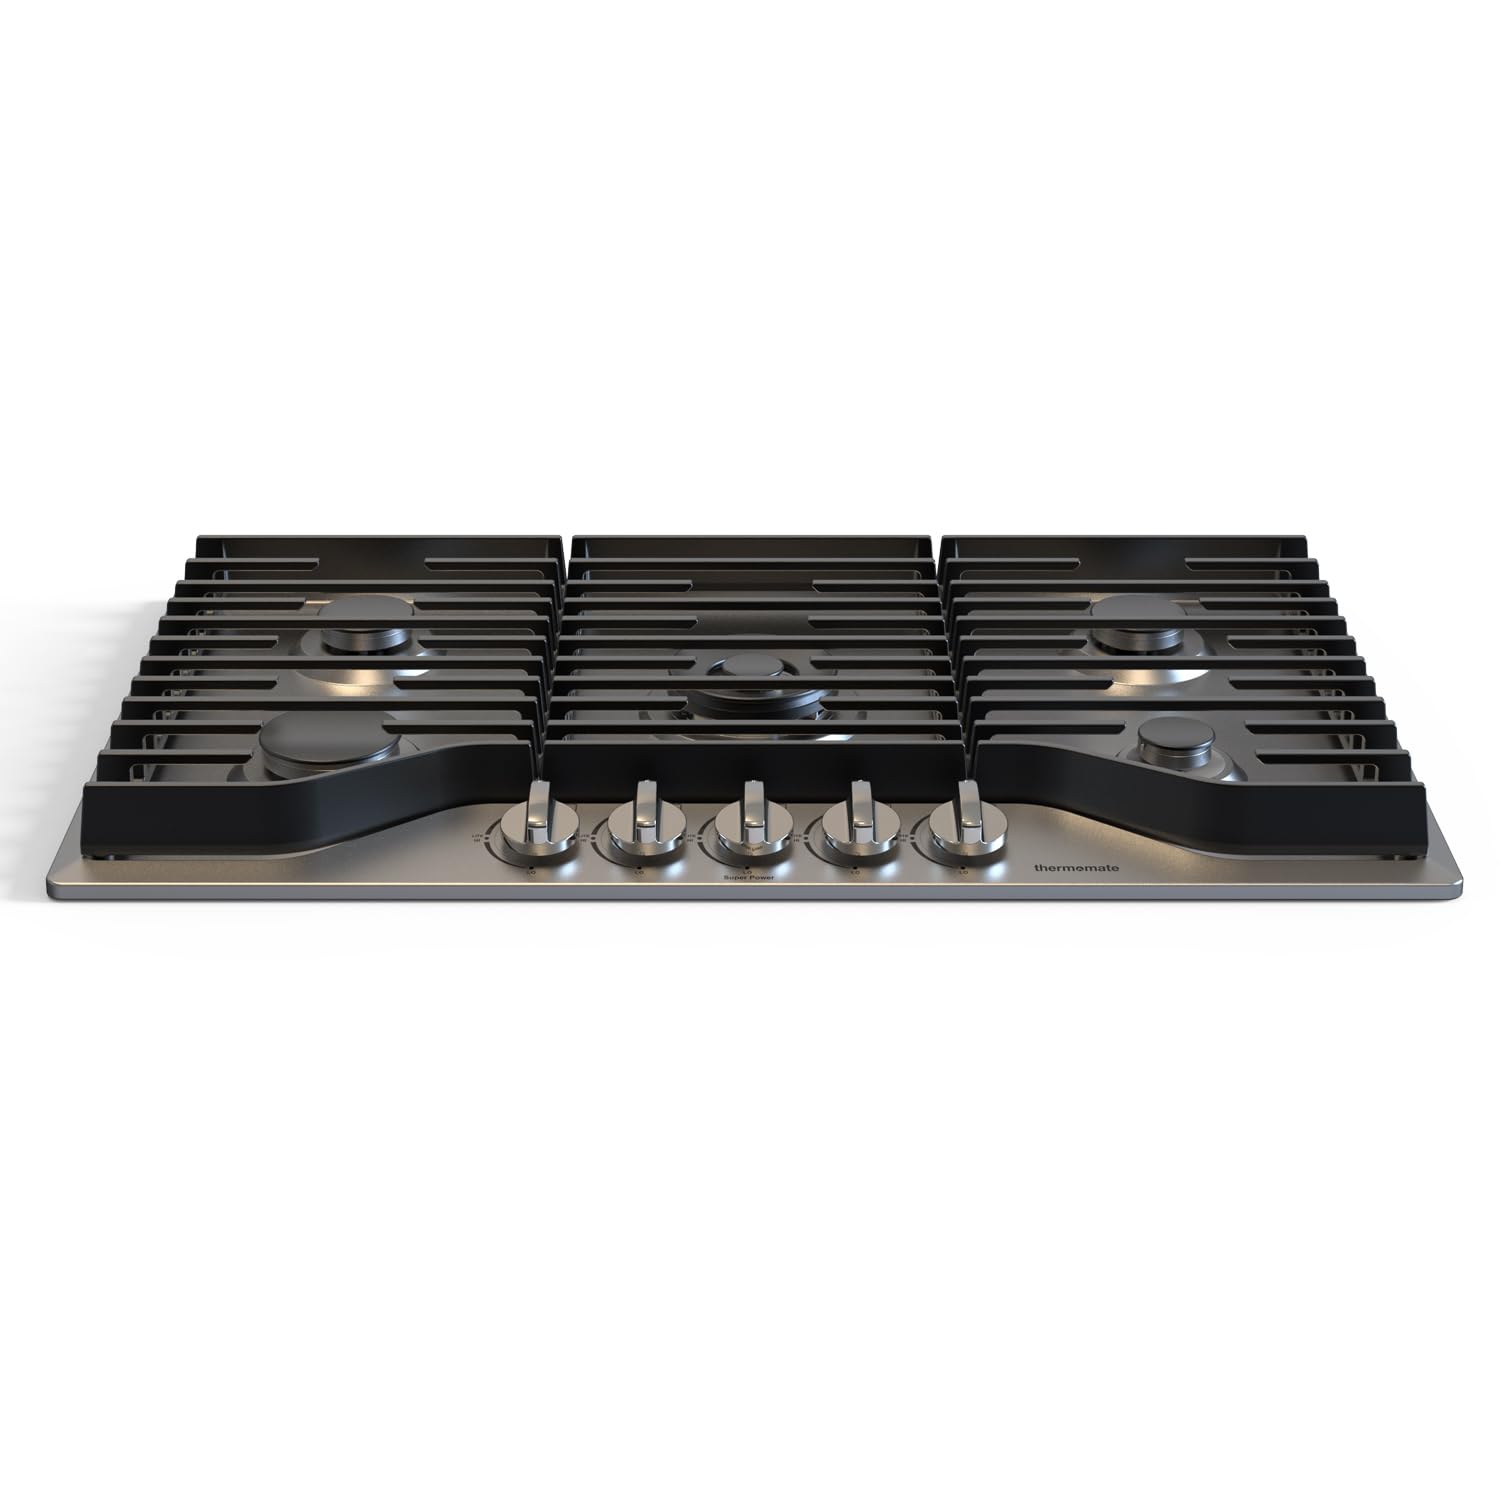 Thermomate 36 Inch Built-In Gas Cooktop w/ 5 SABAF Burners